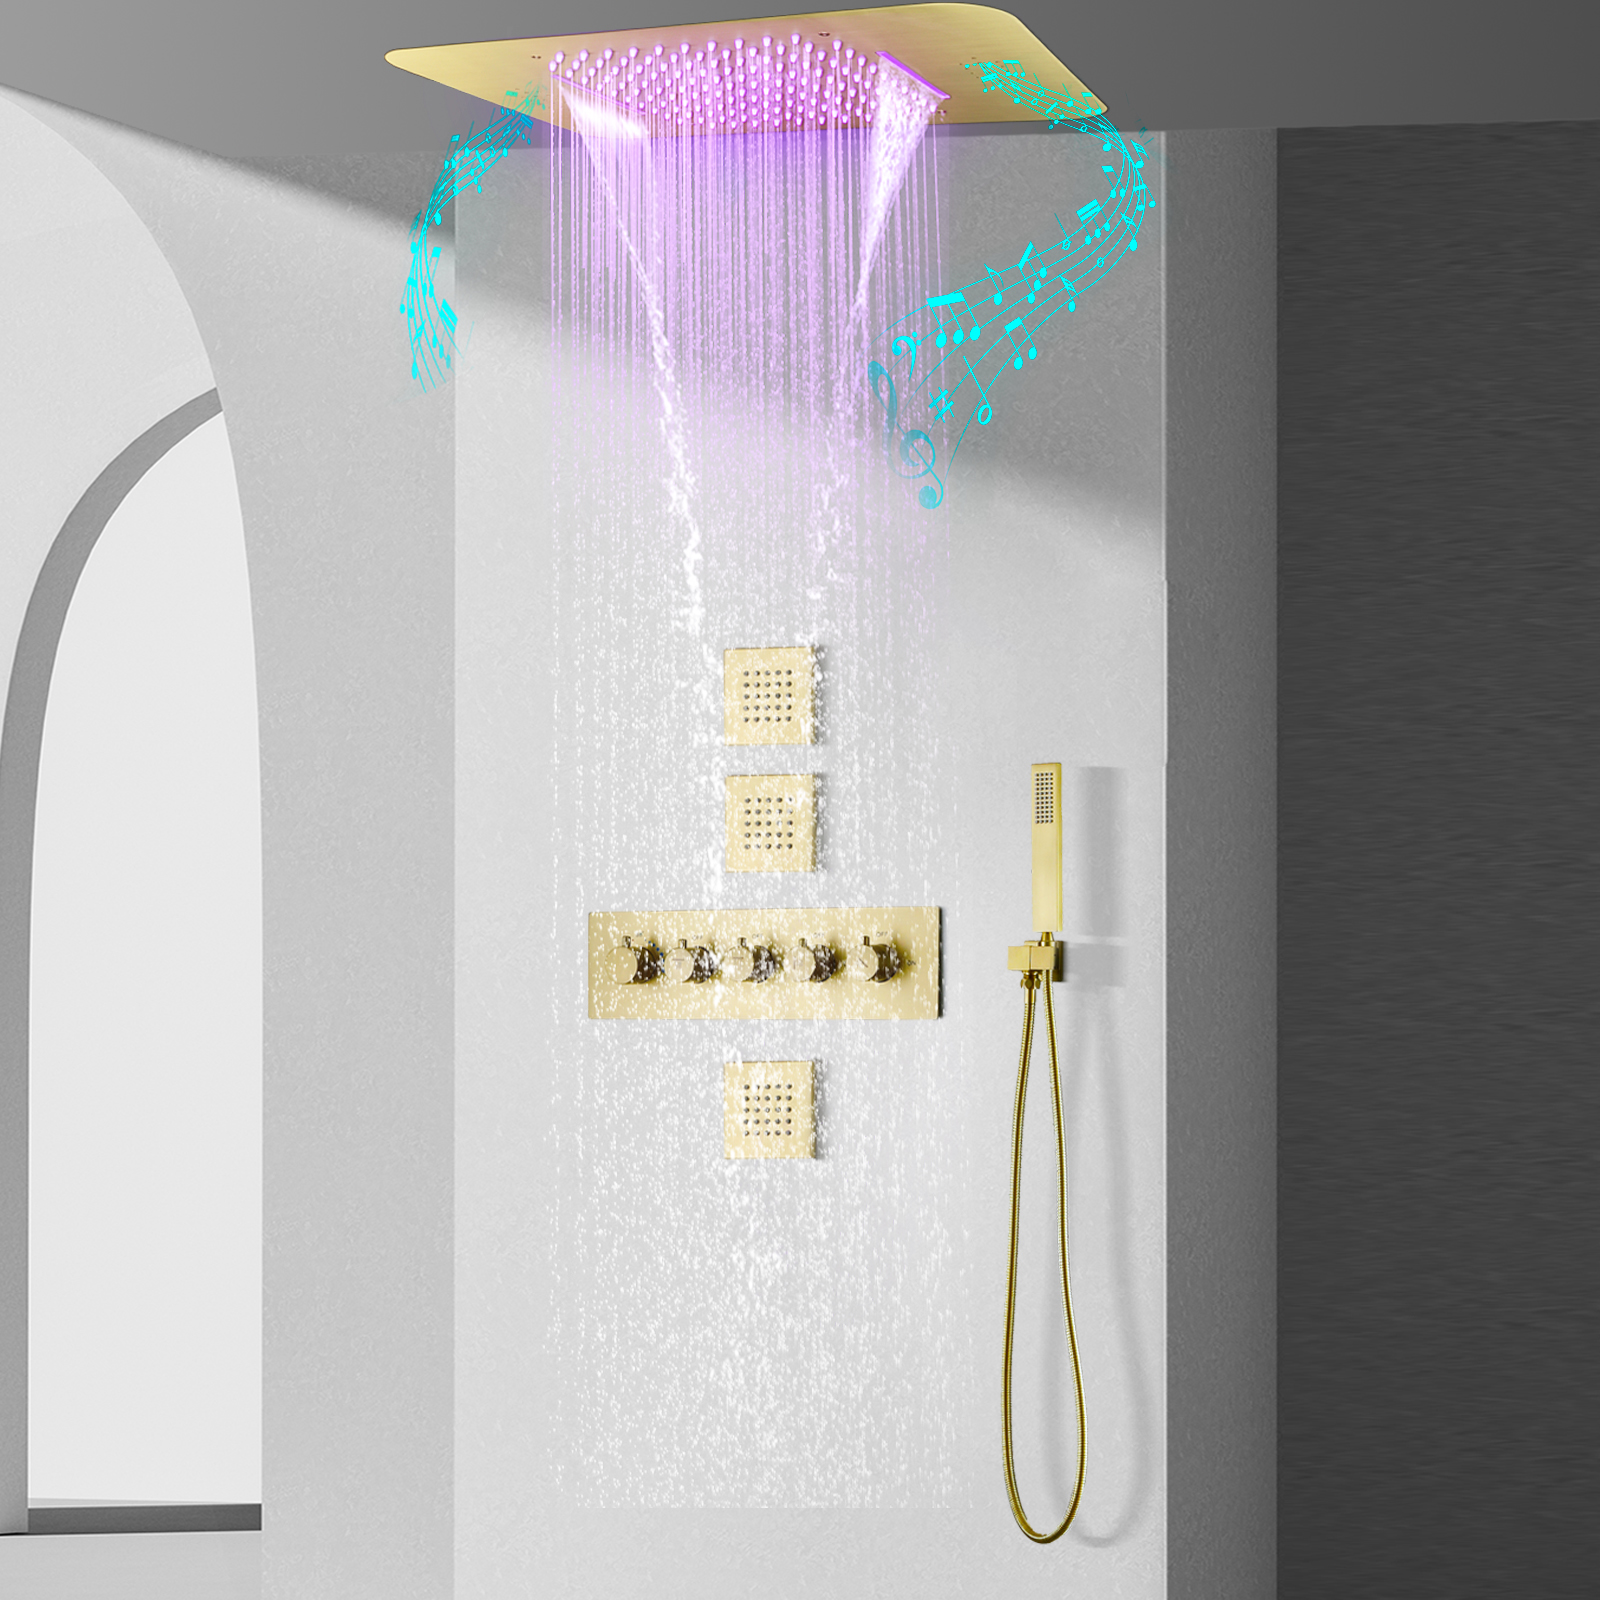 Bathroom Concealed Rain Shower Mixer Faucet 23X15ing Ceiling Mount Thermostatic Brushed Gold Rain Shower Waterfall Sprinkler Sho